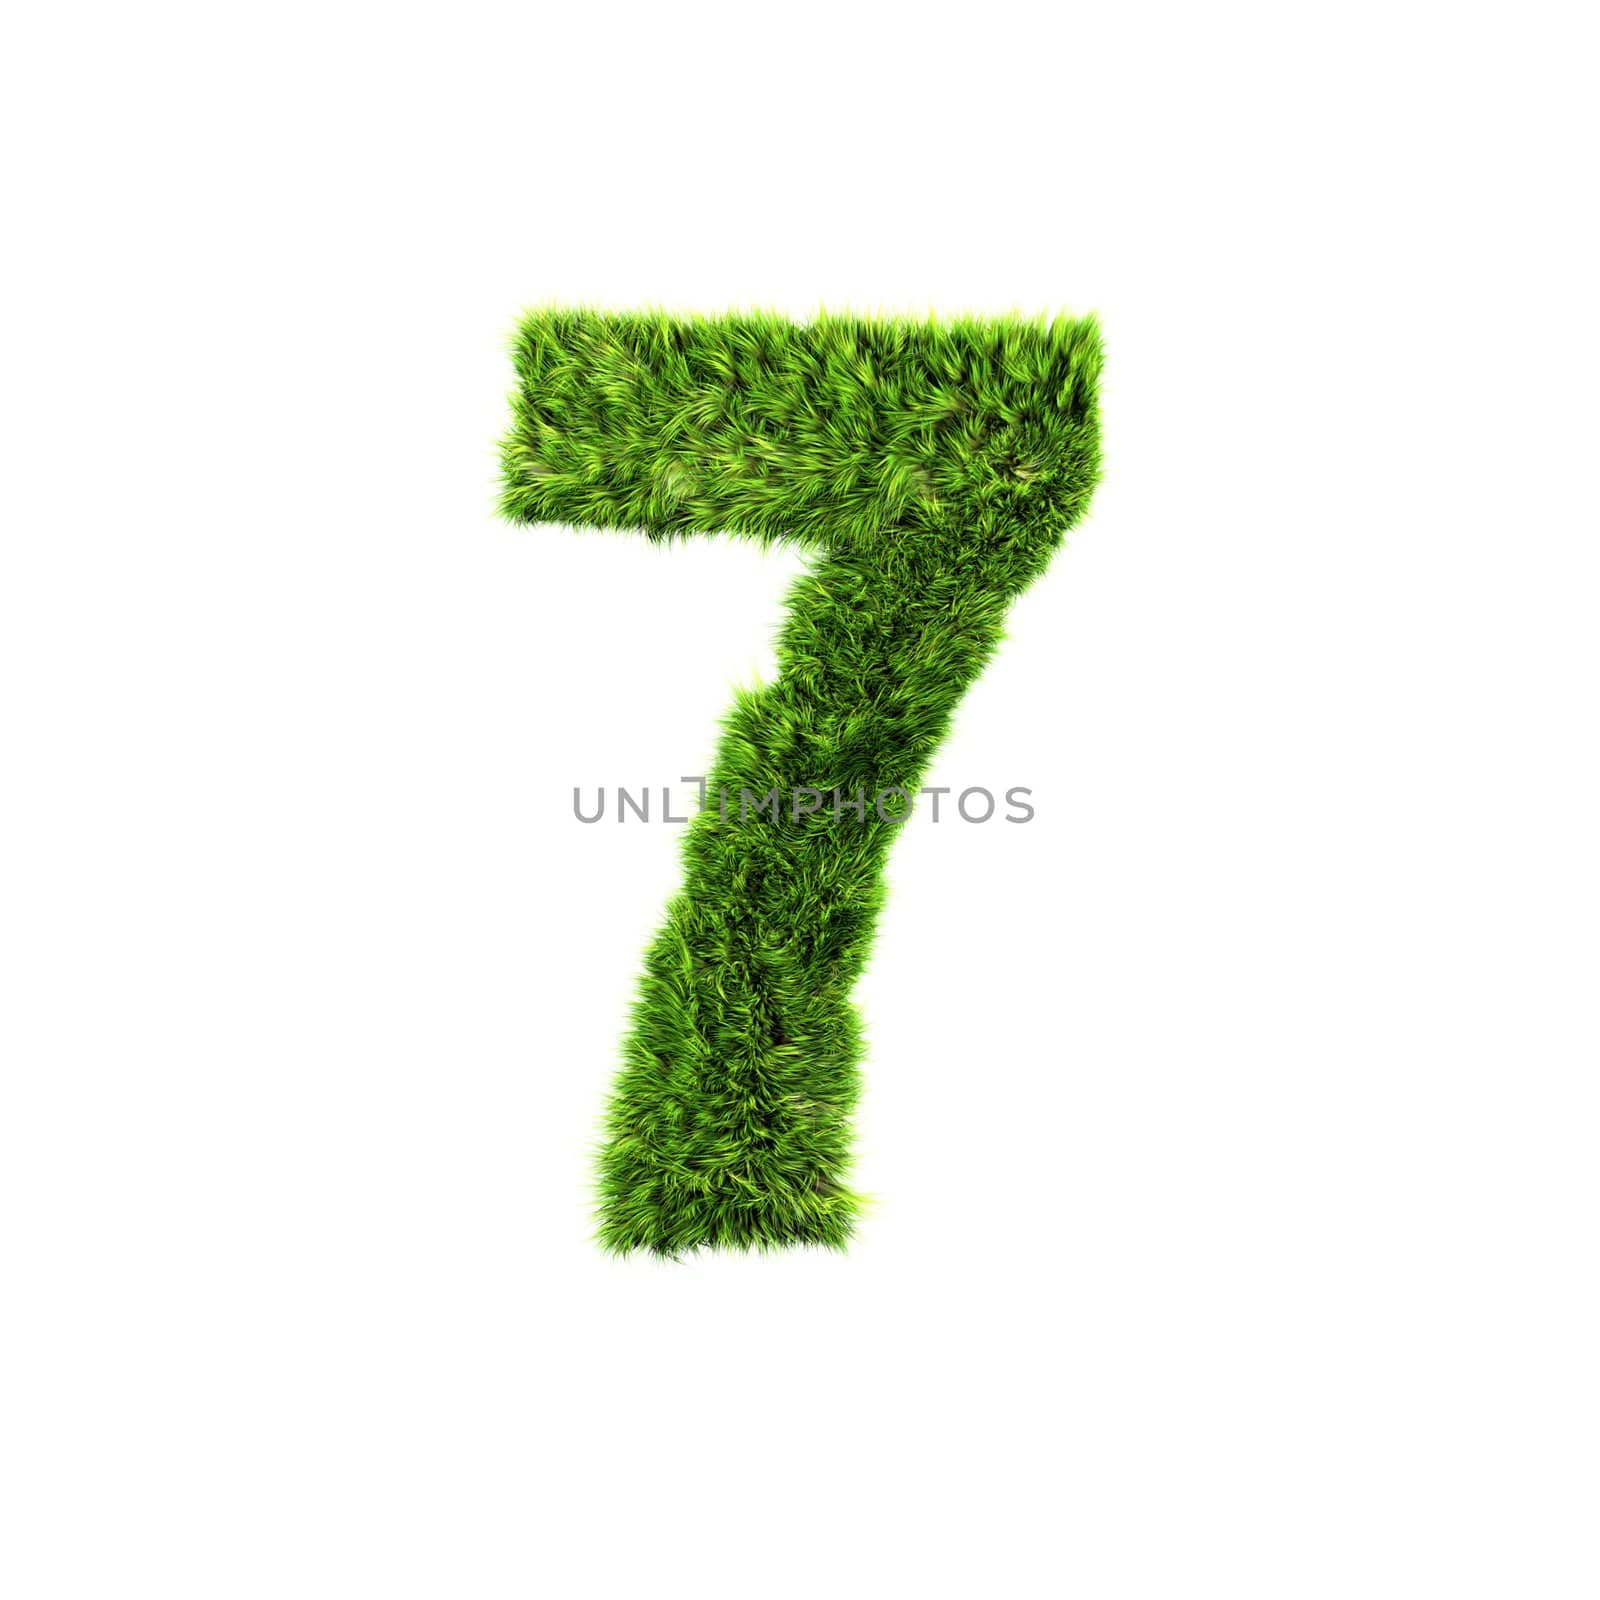 3d grass digit isolated on a white background - 7 by chrisroll